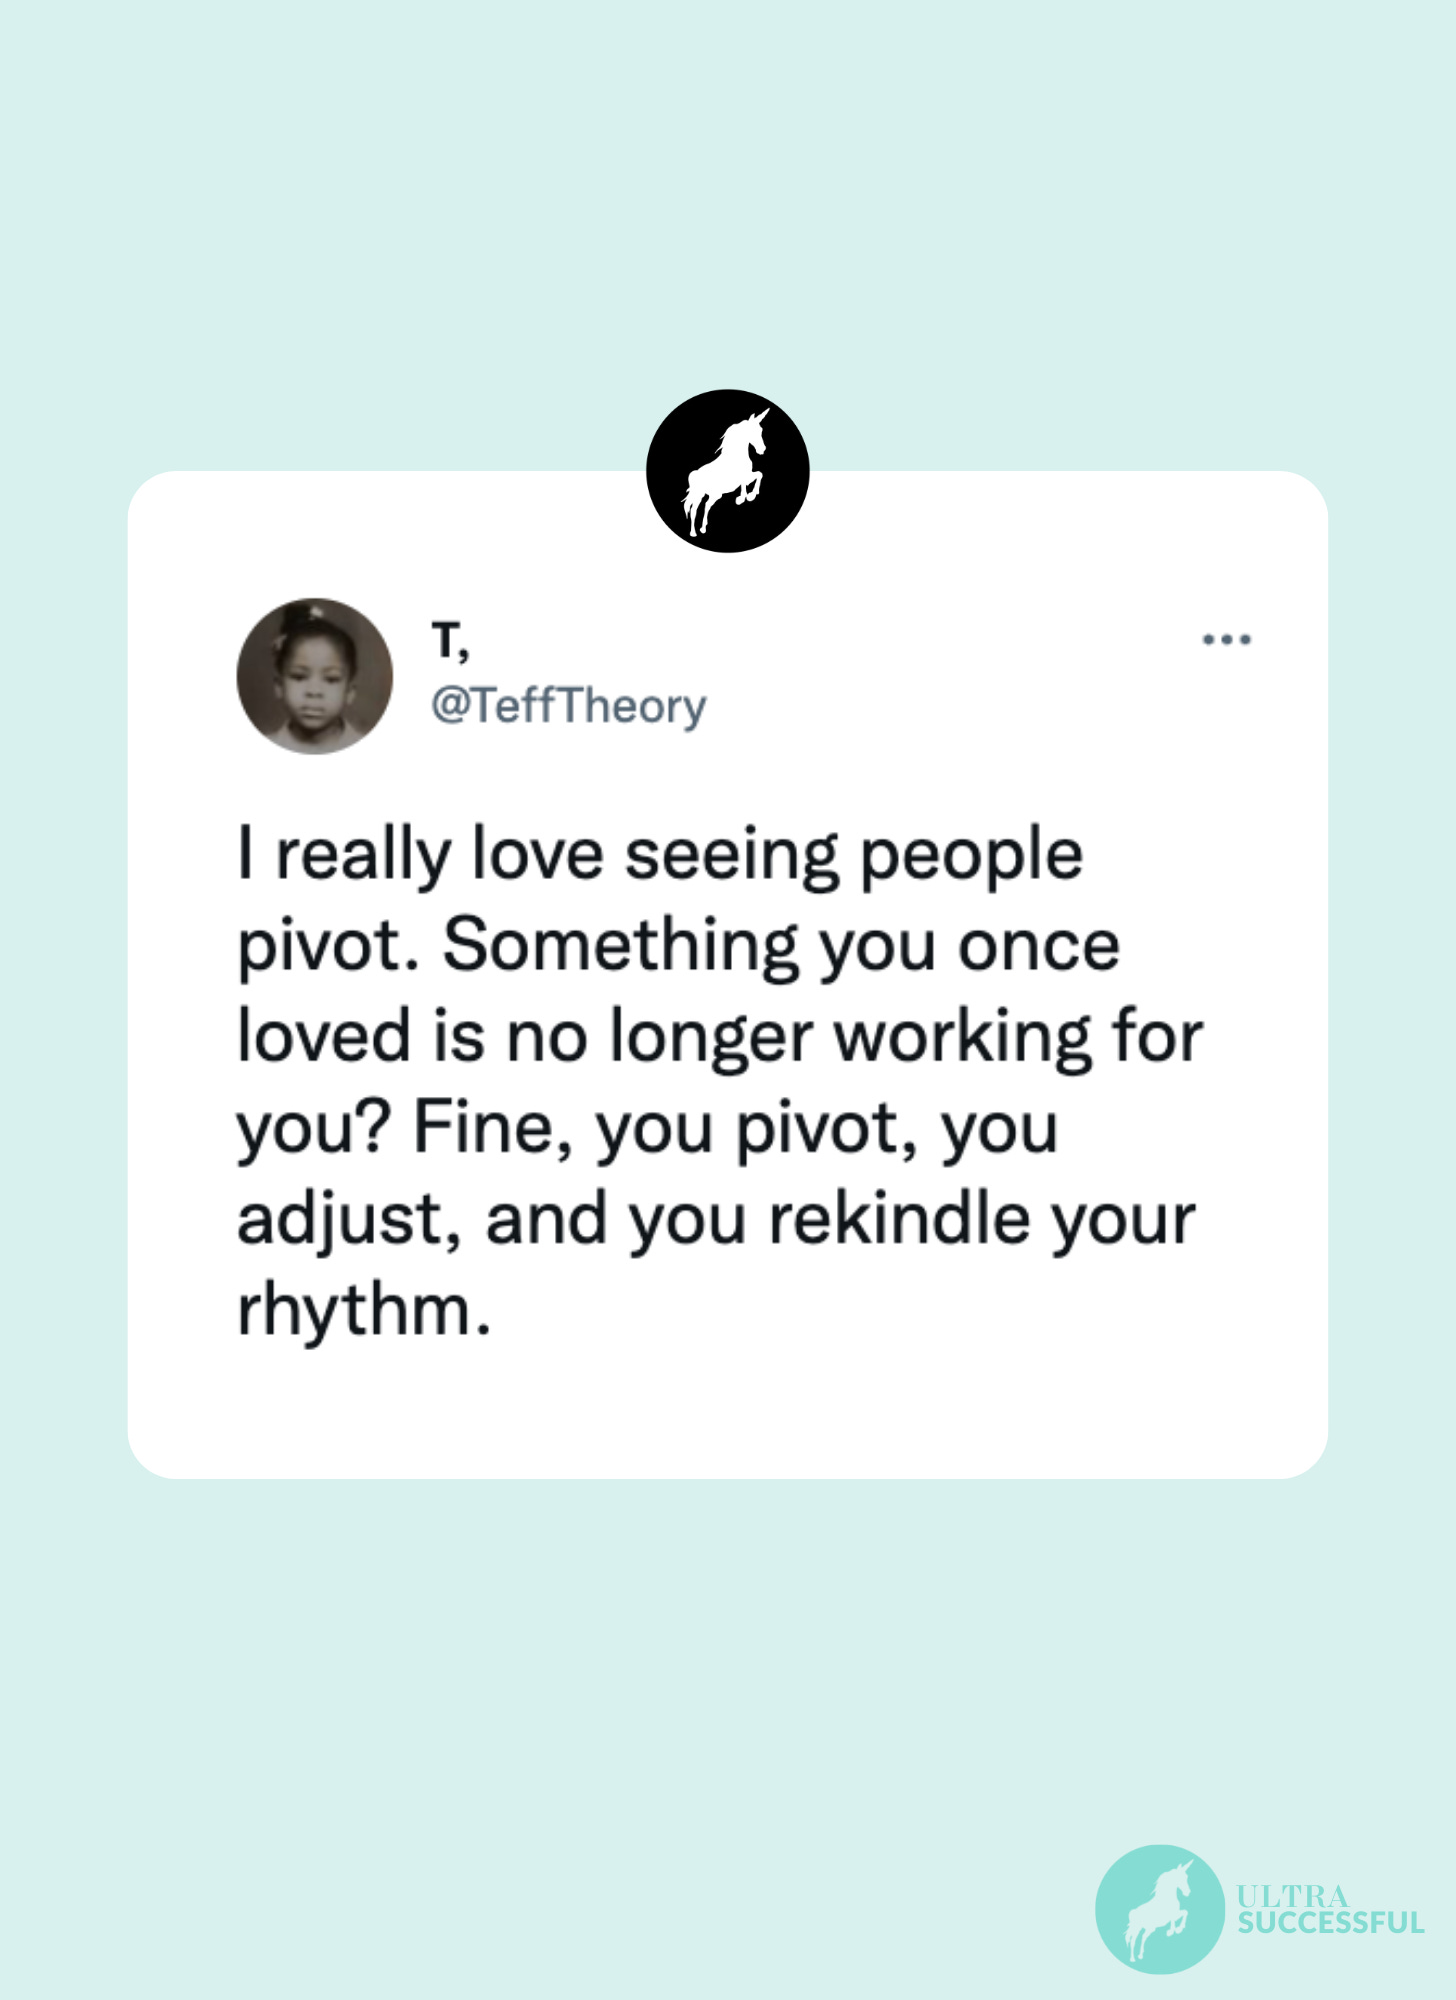 @TeffTheory: I really love seeing people pivot. Something you once loved is no longer working for you? Fine, you pivot, you adjust, and you rekindle your rhythm.